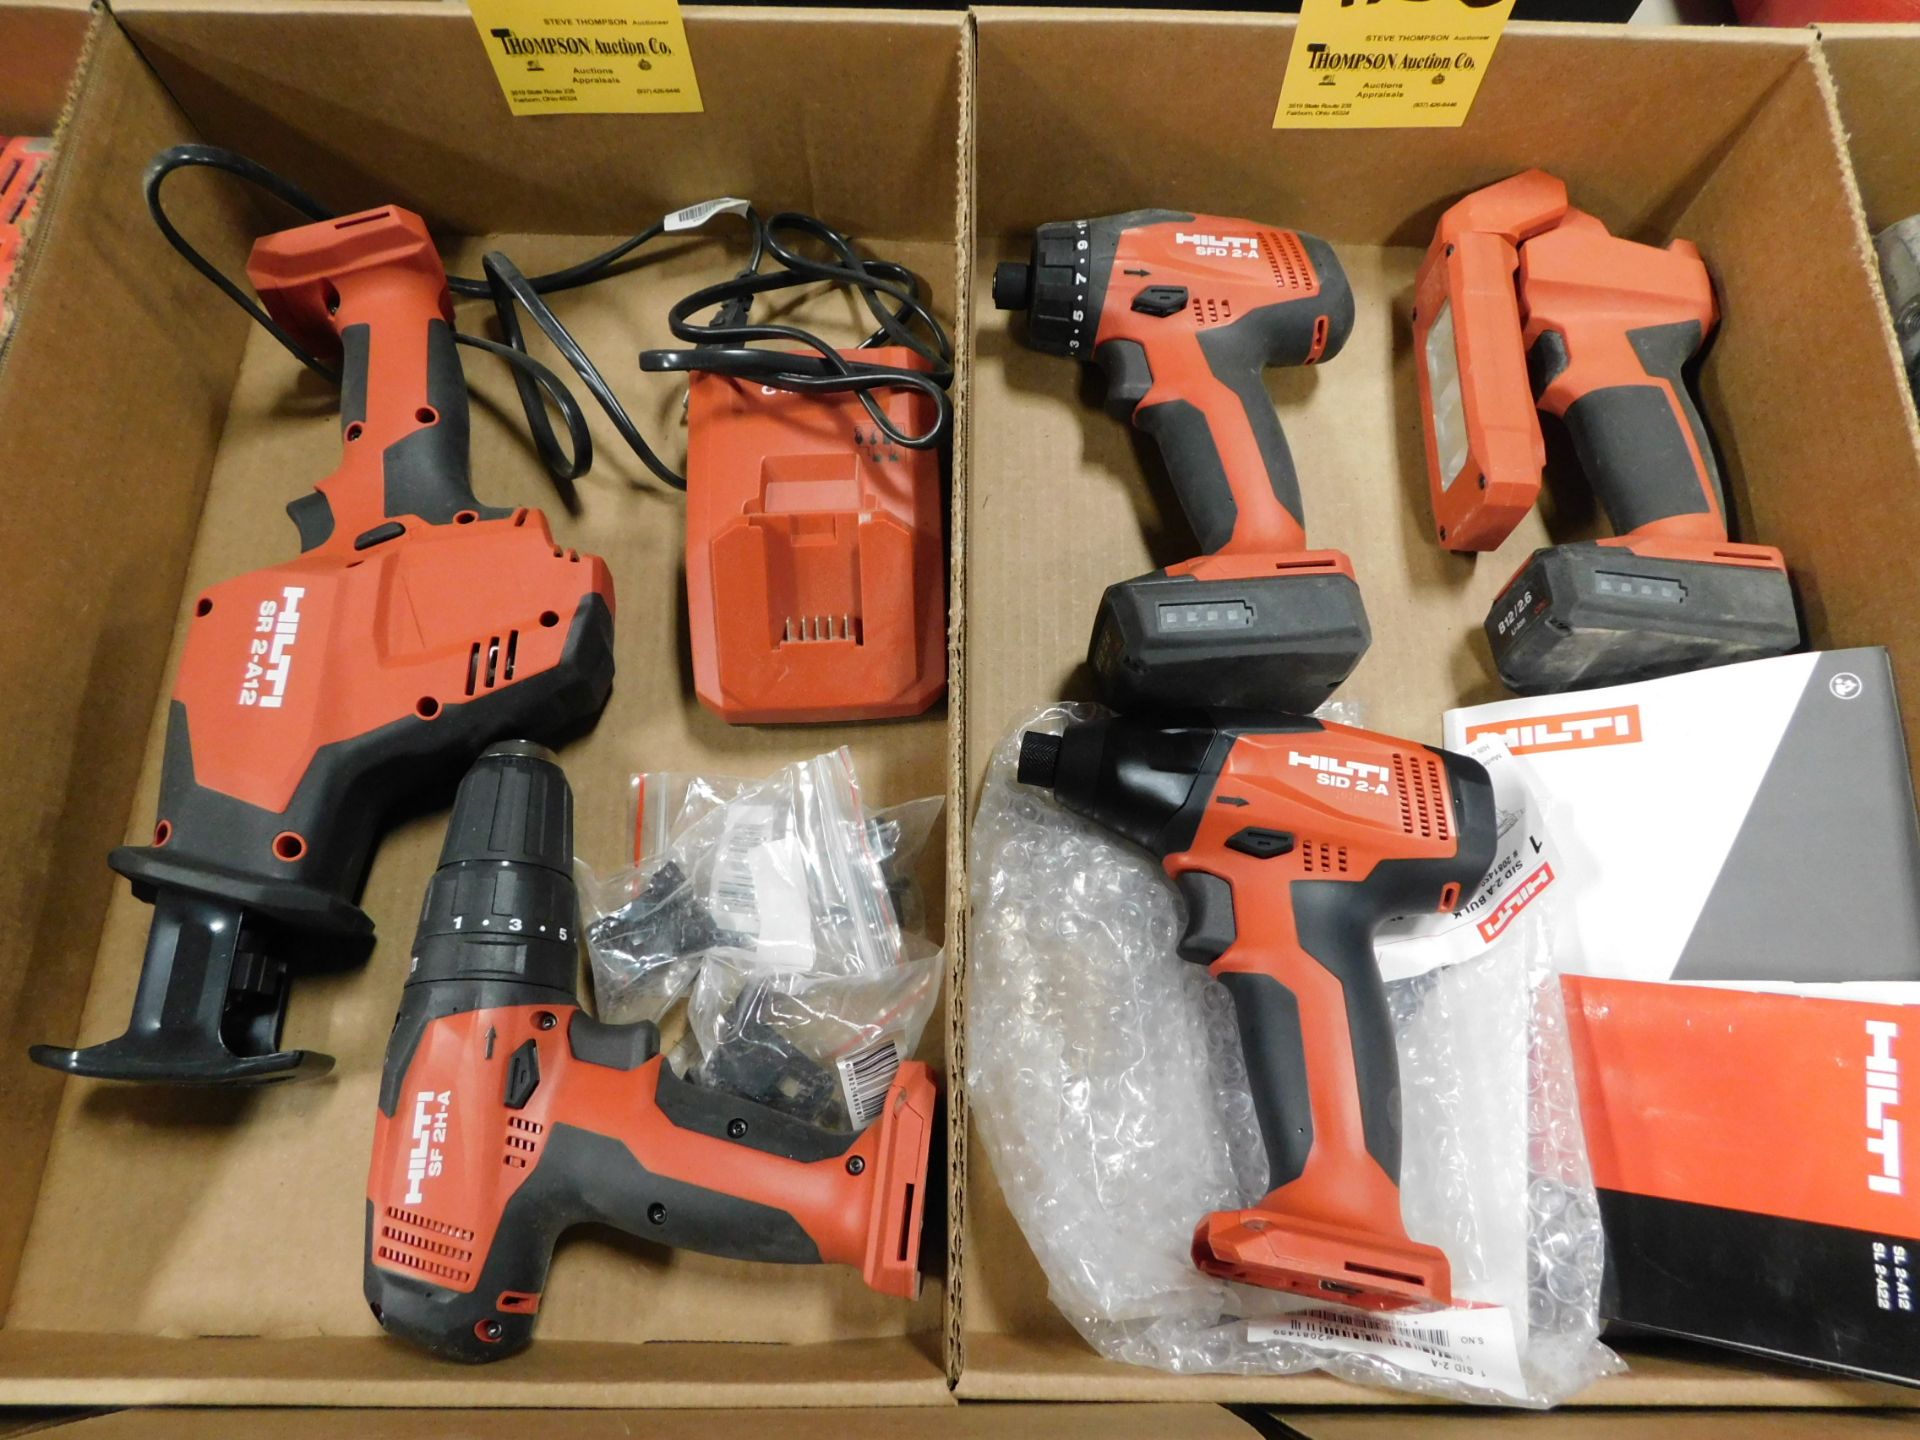 Hilti 5 Tool Kit, Reciprocating Saw, (2) Drivers, Drill and Light with Charger and Bag